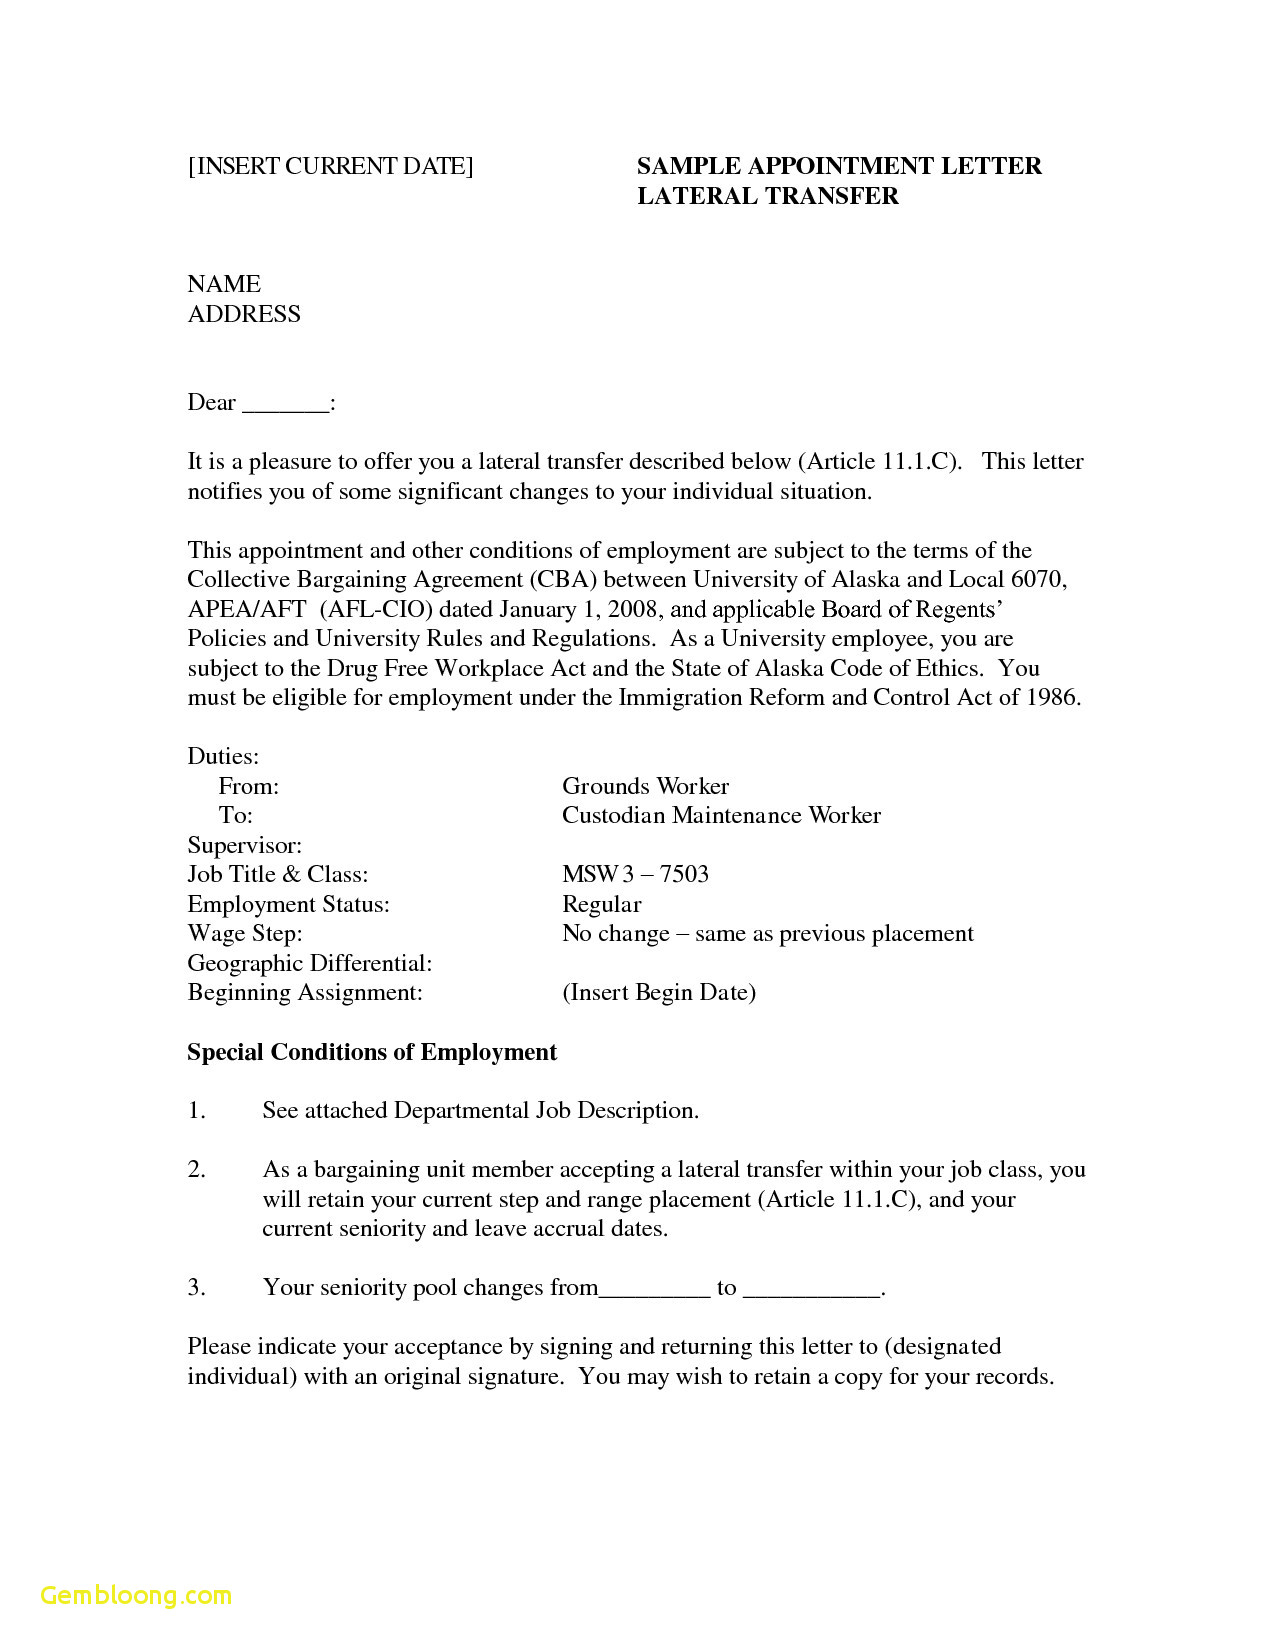 General Cover Letter Template - General Maintenance Resume Download now Cover Letter Template Word